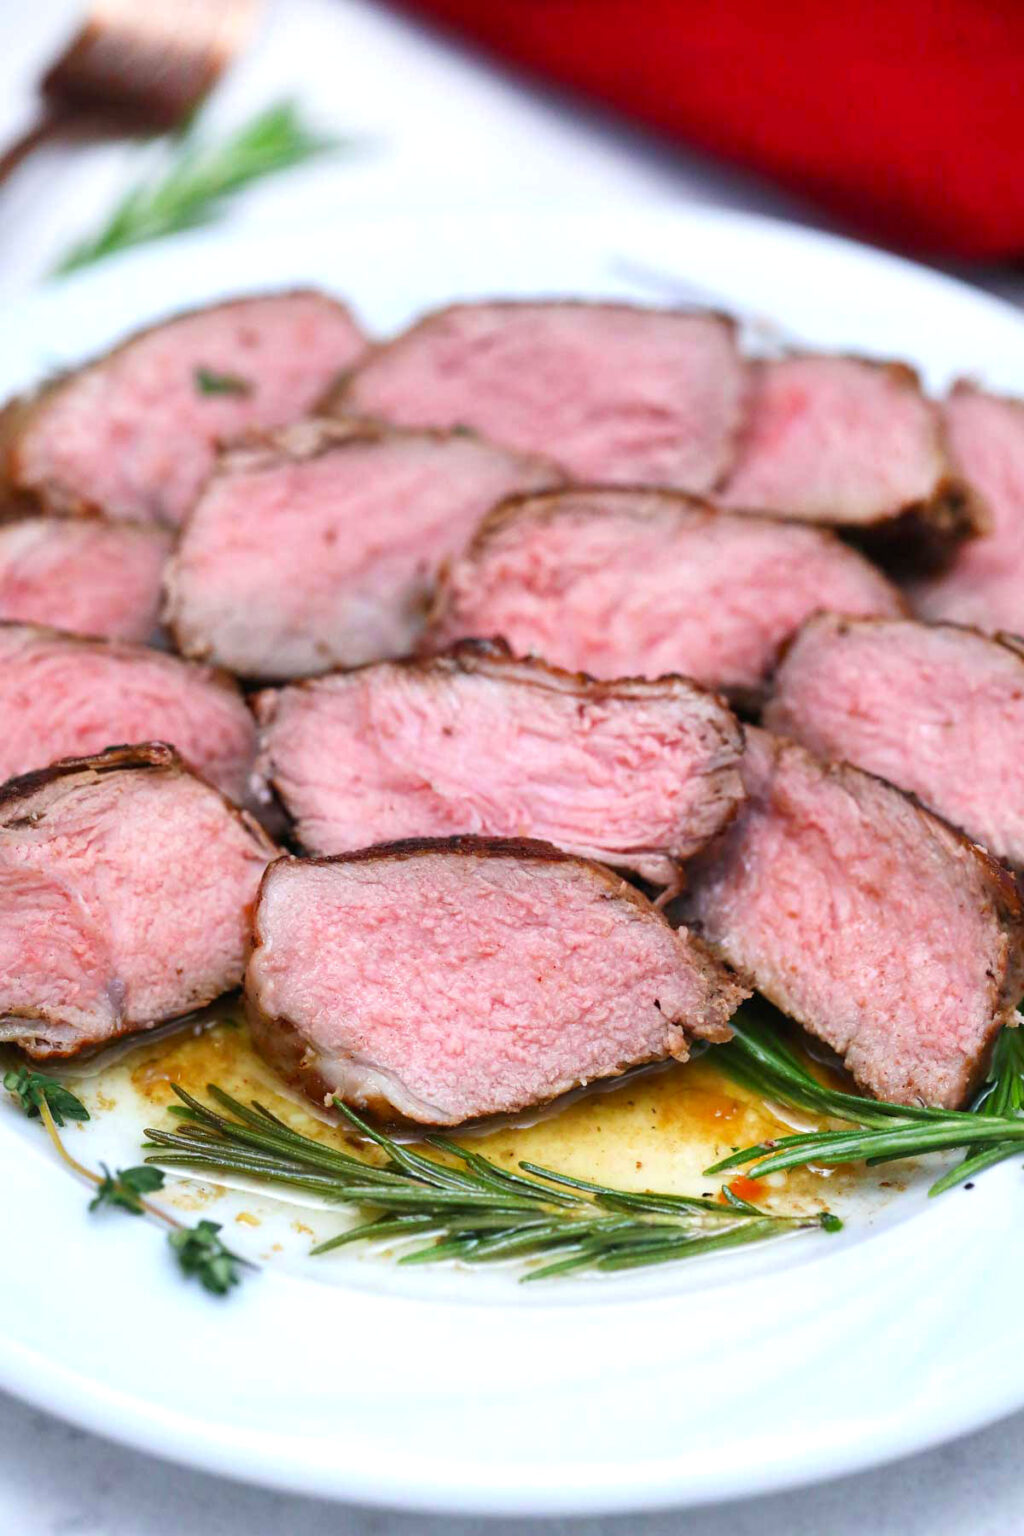 Pan Seared Steak [Video] - Sweet and Savory Meals